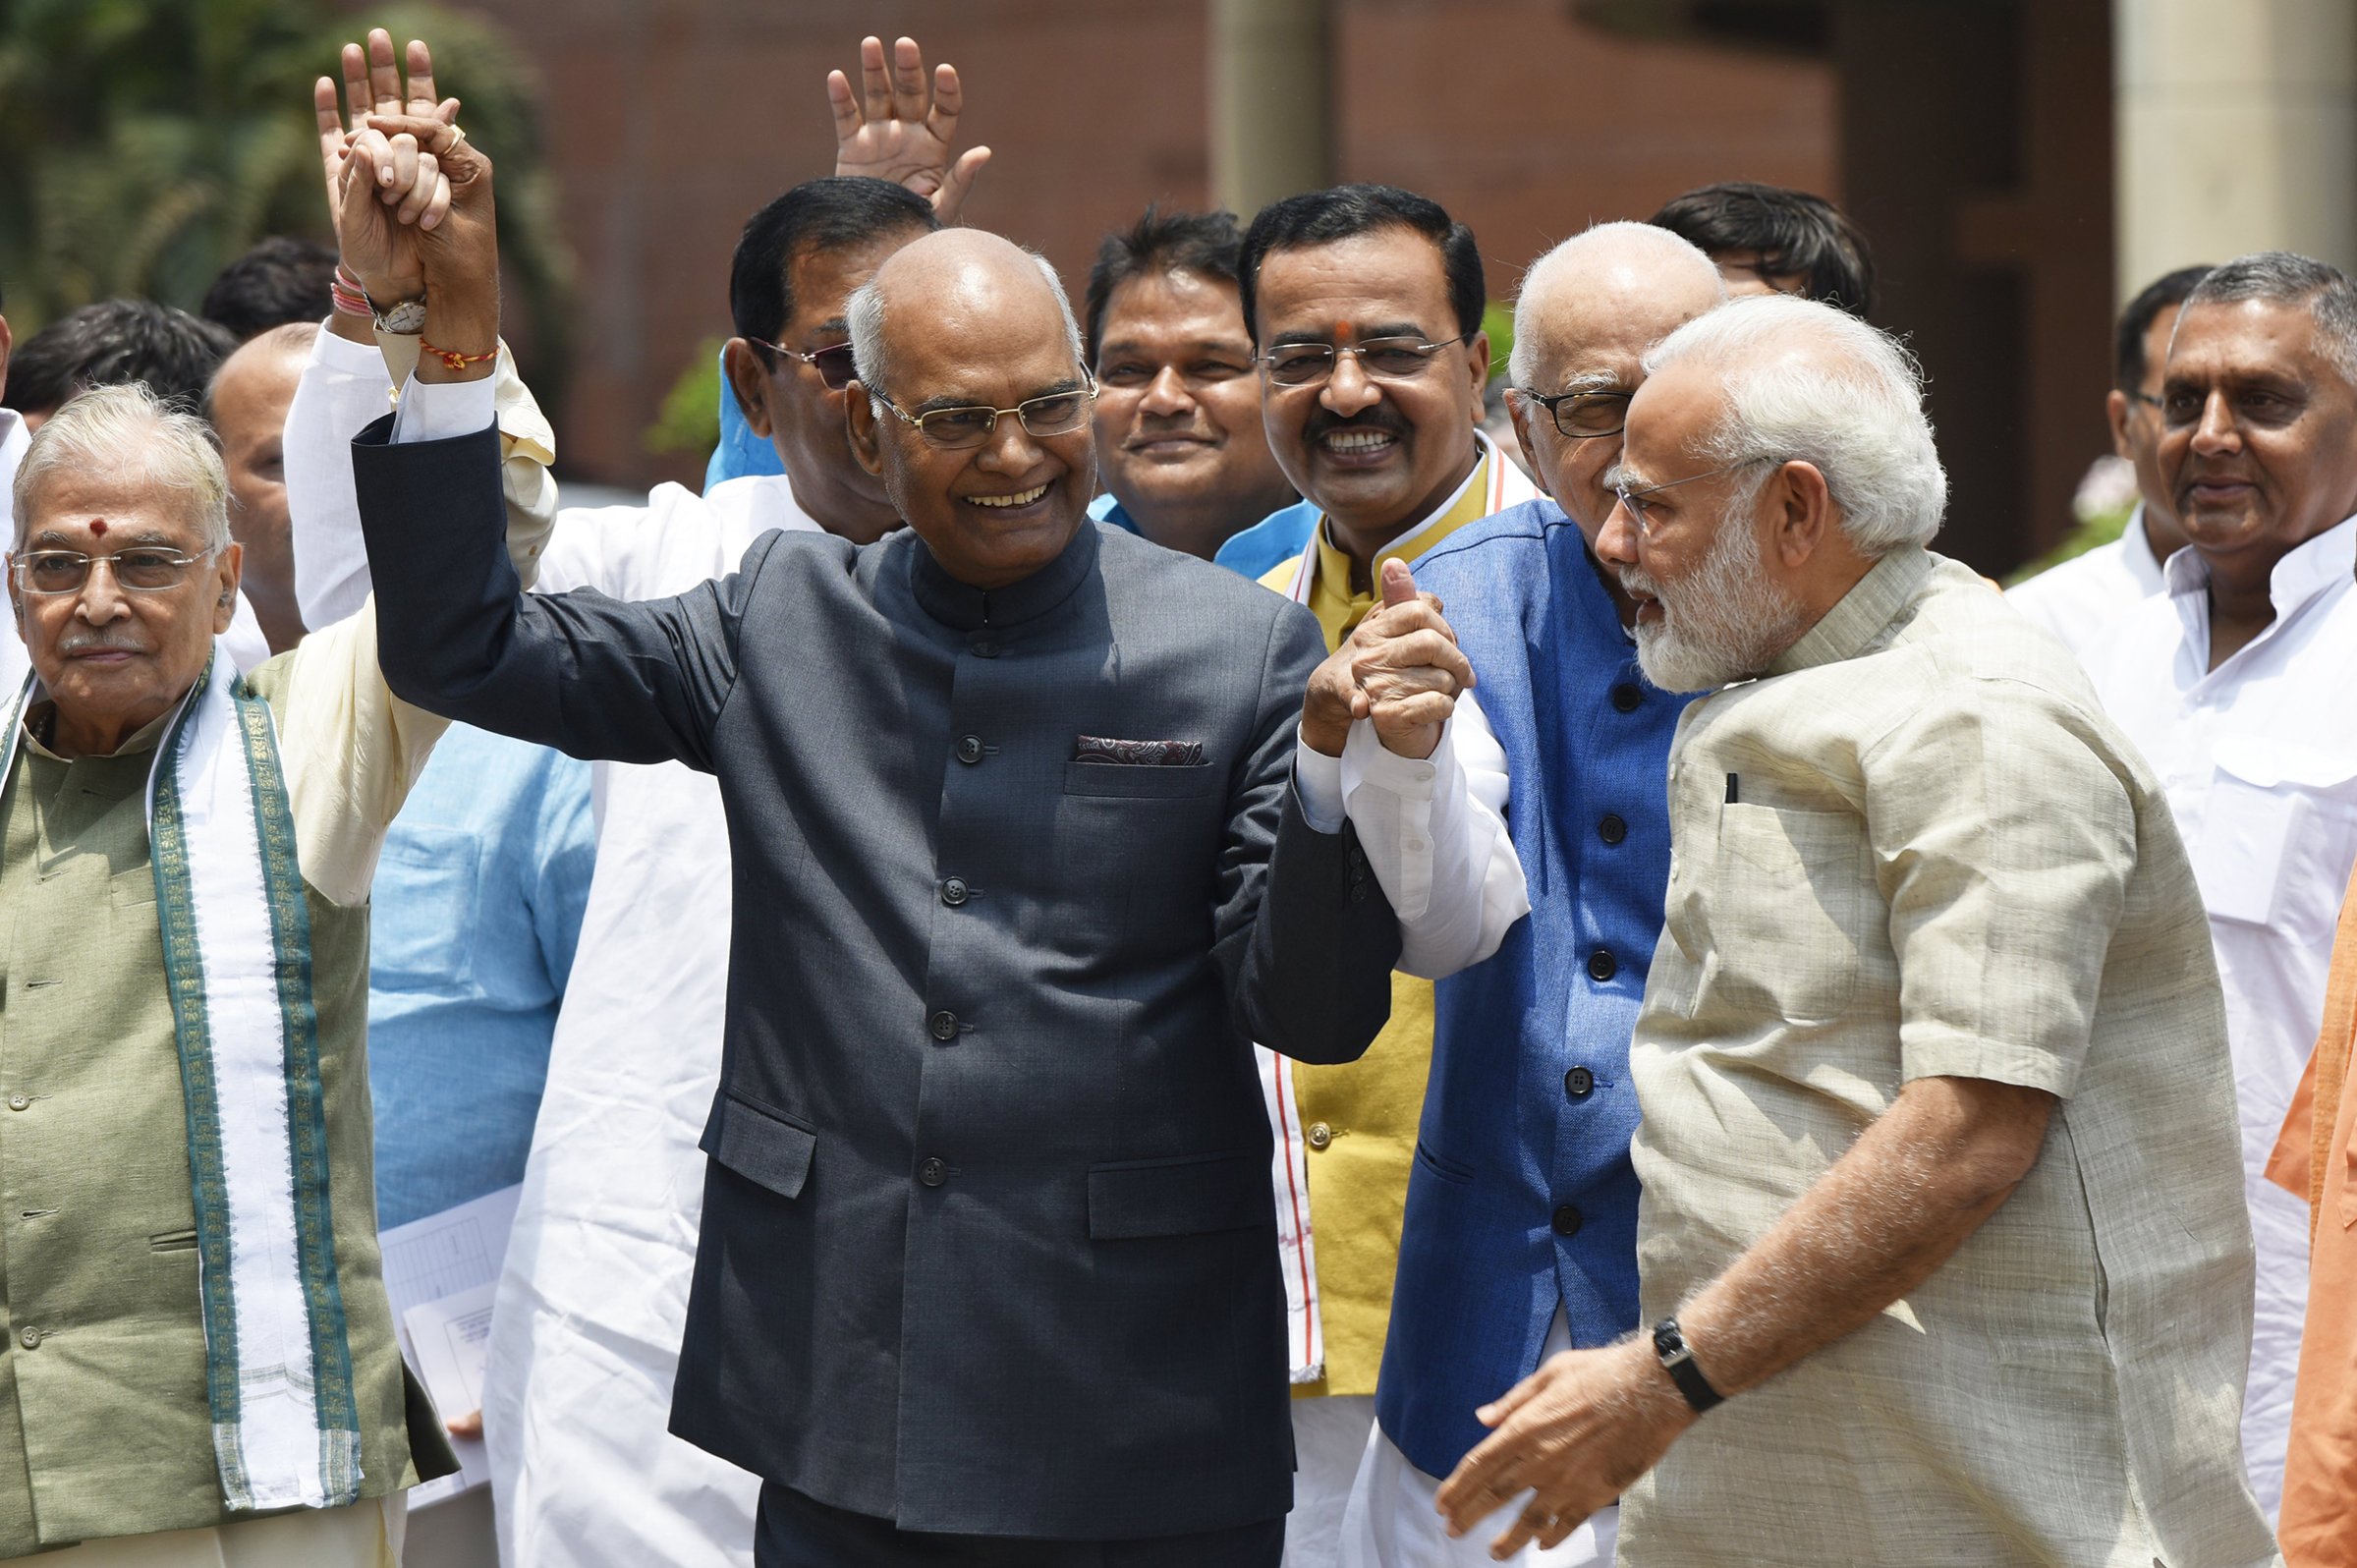 Ram Nath Kovind was due to be named the 14th President of India on July 20